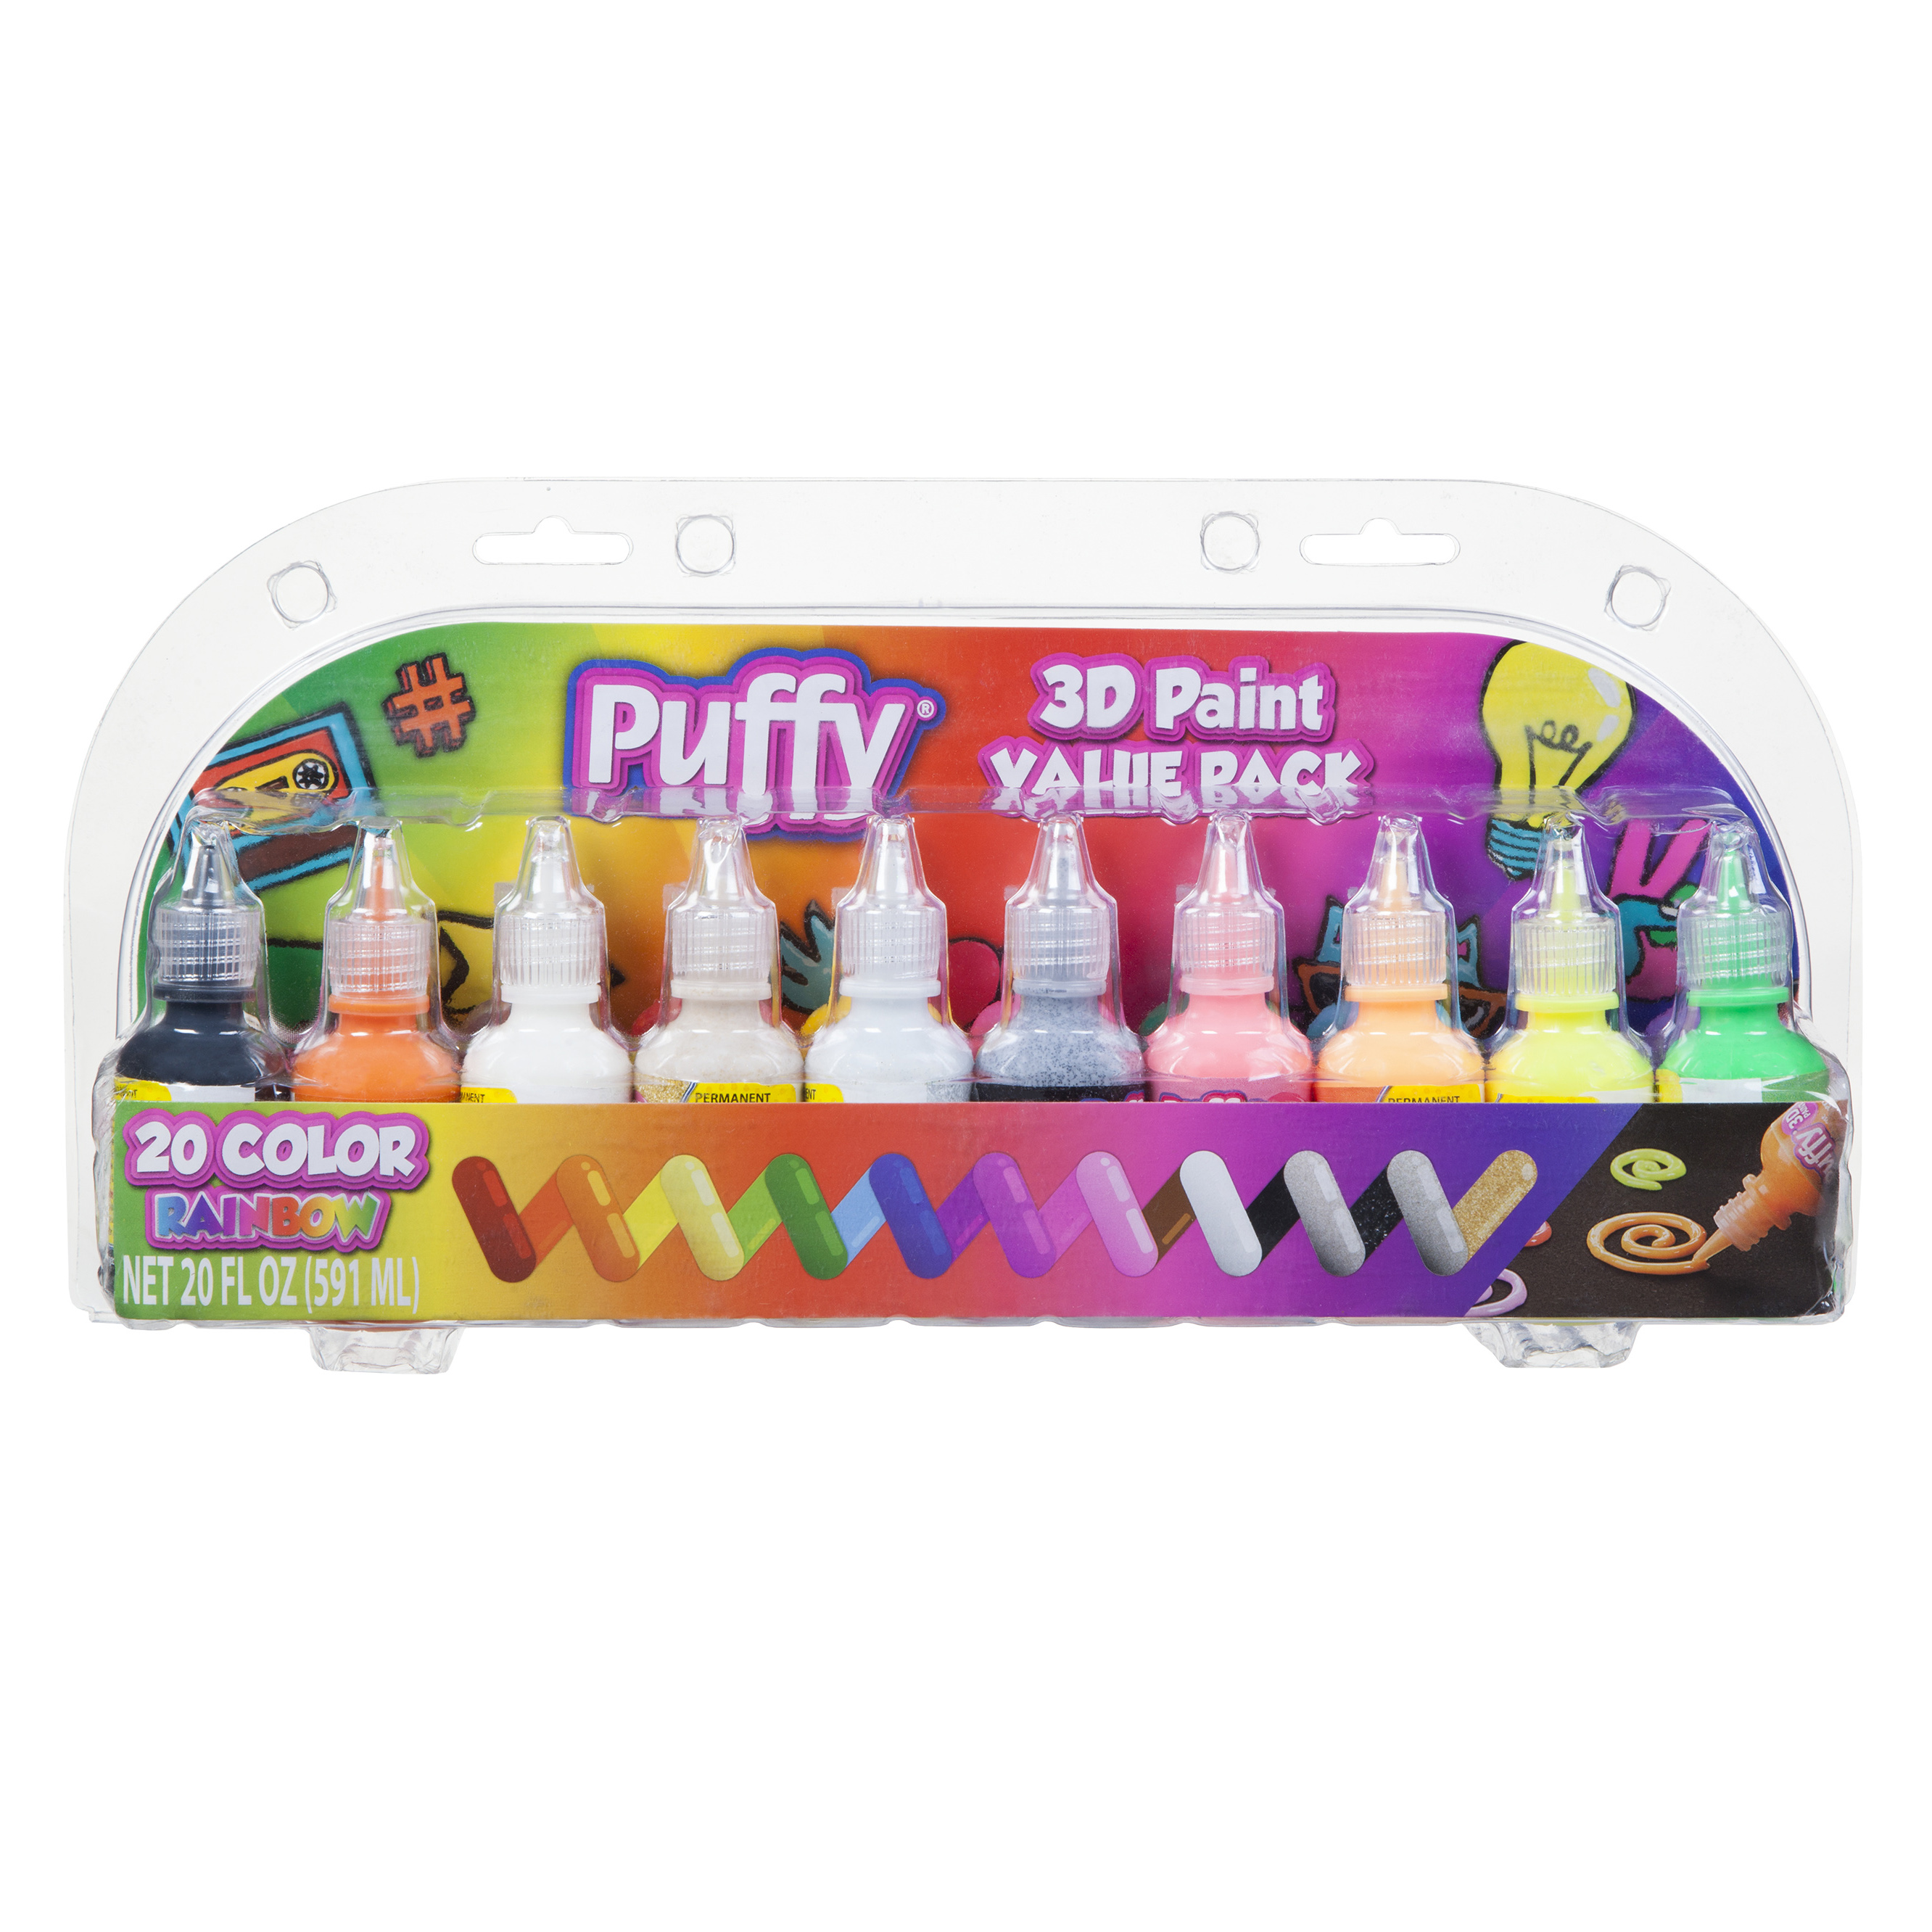 Puffy 1 fl oz 3D Paint Value Pack 20 Rainbow, Multi-Color - image 1 of 6